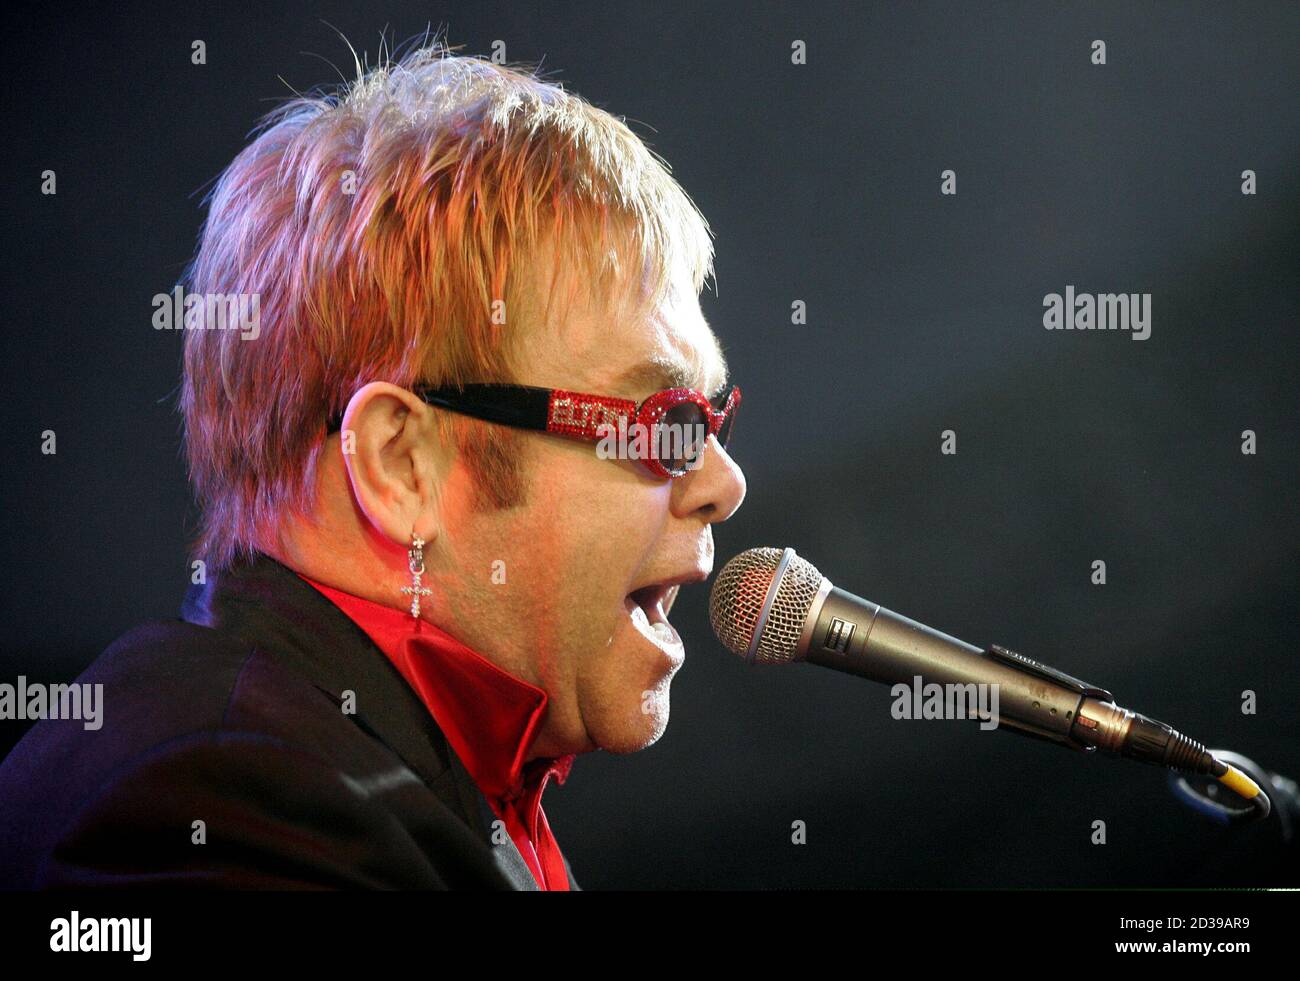 Elton John performs during a VIP party celebrating the launch of his 'Dream Ticket' DVD collection at Caesars Palace hotel and casino in Las Vegas, Nevada October 24, 2004. The four DVD collection is seven hours long, with more than 70 songs and never-before-seen concert material and behind-the scenes footage. Stock Photo